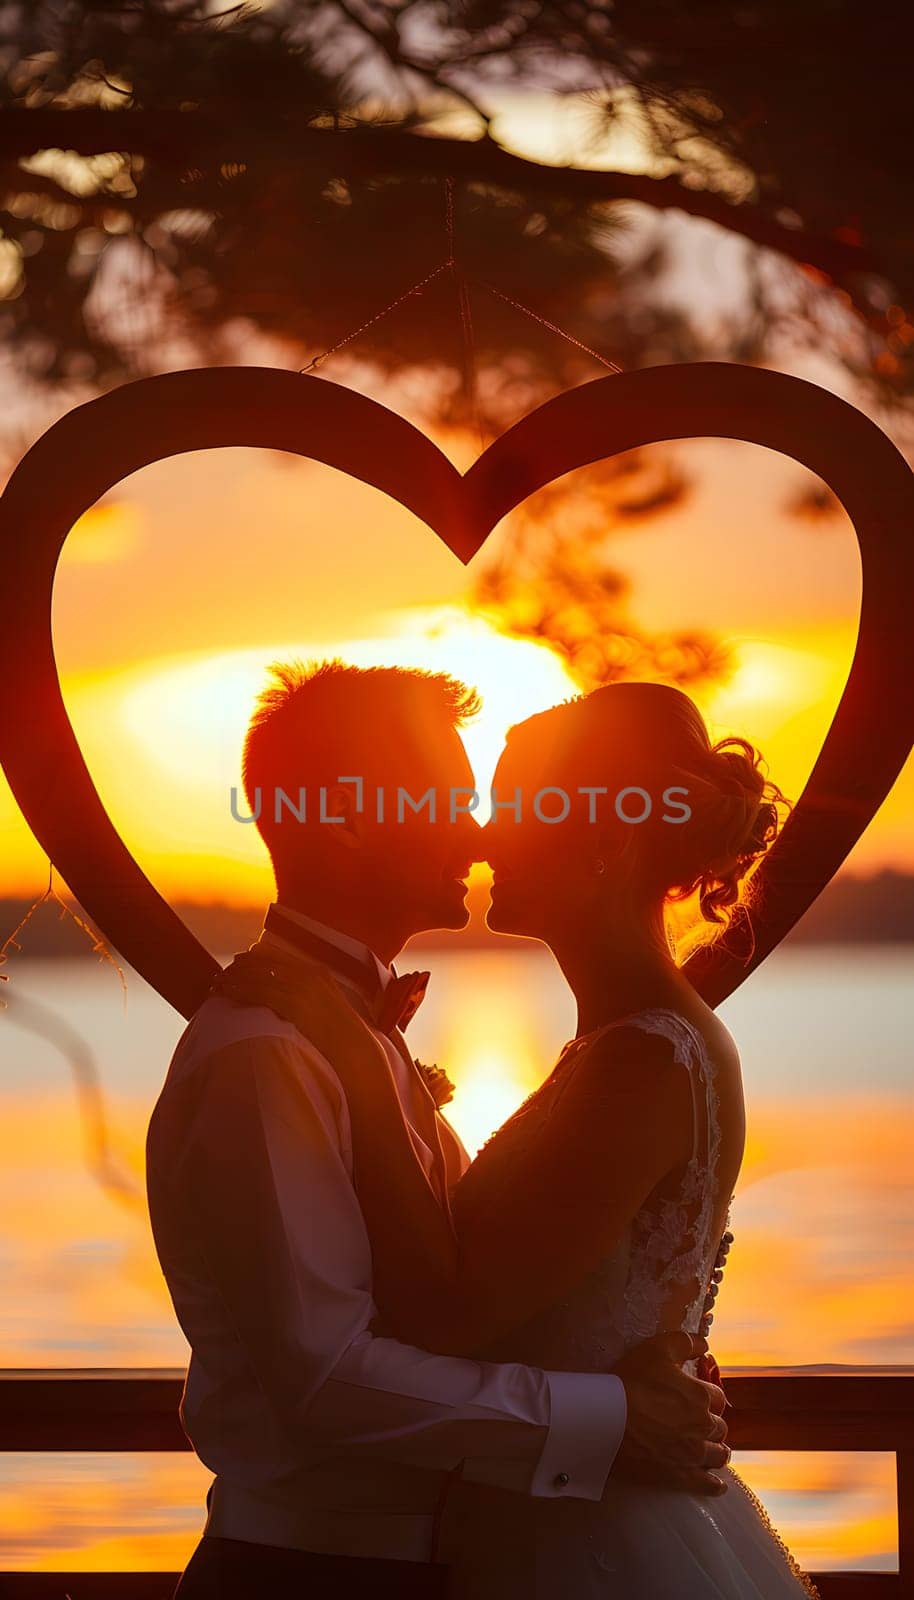 a bride and groom kissing in front of a heart shaped frame at sunset by Nadtochiy